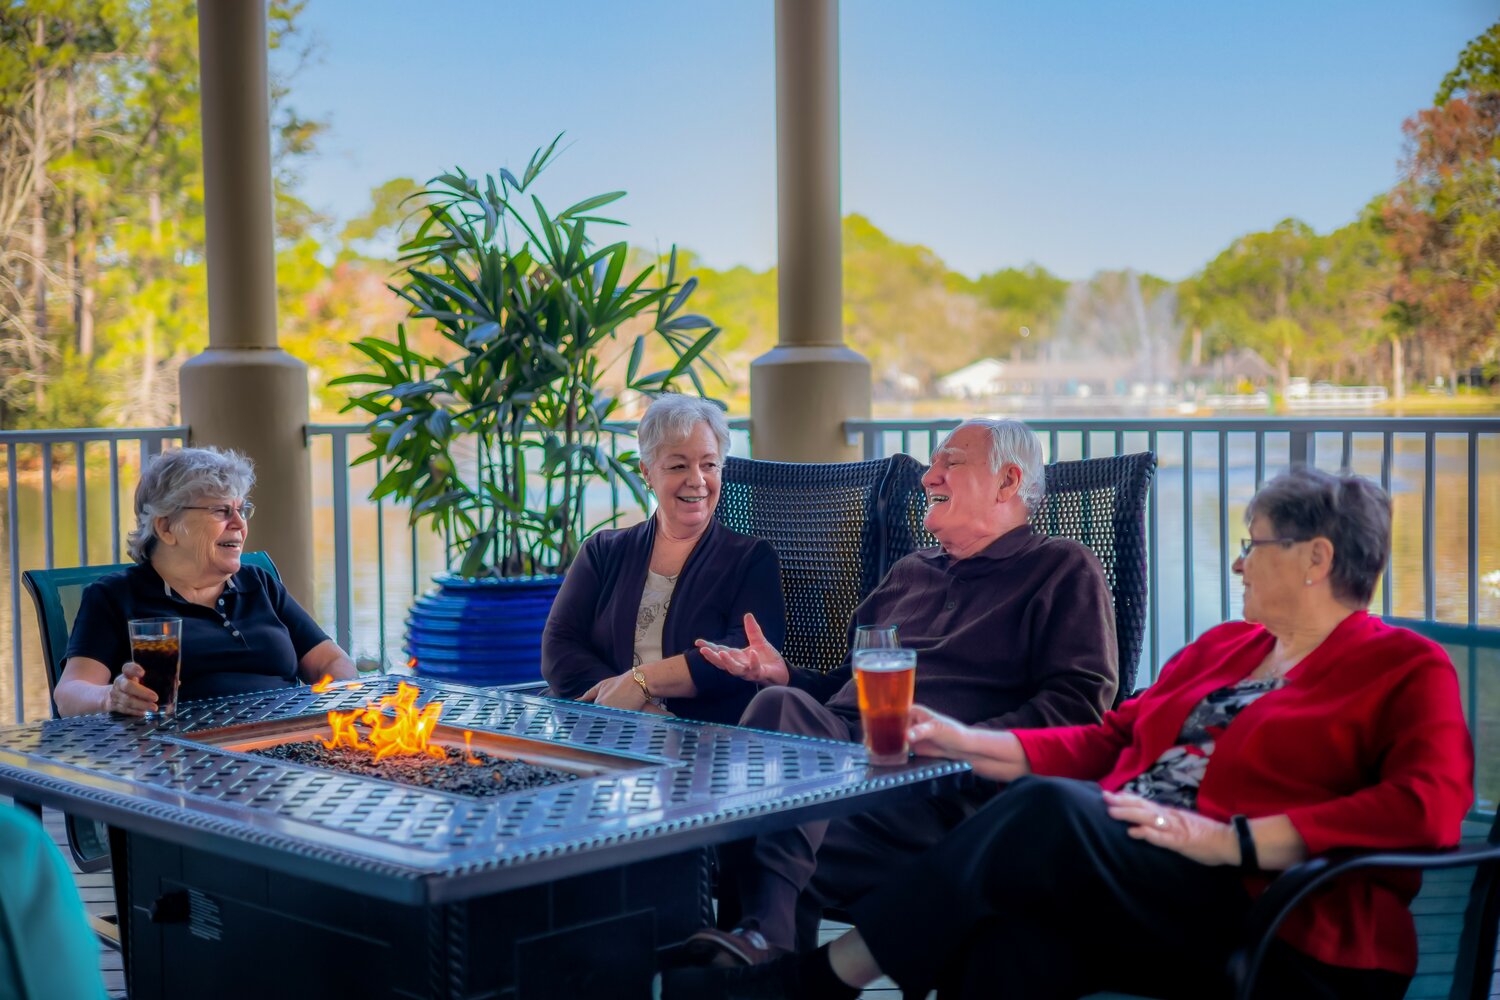 Cypress Village residents say they have formed lifelong bonds after connecting at some of the welcoming parties.